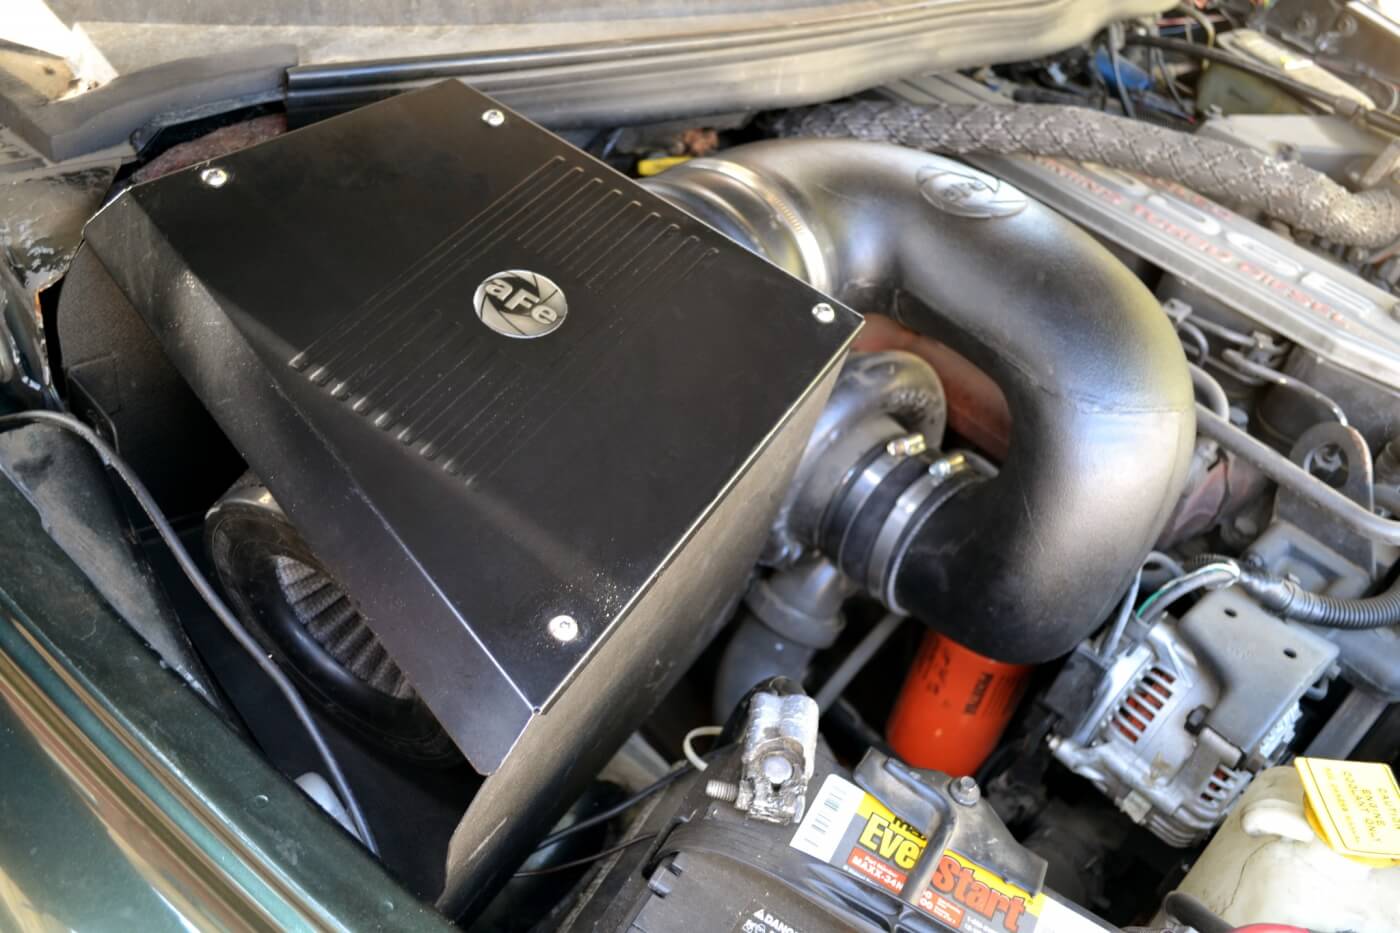 21. With the finished product looking good, we were ready to hit the road. Up next for the RV Ram comes more power and more airflow so that we can actually take advantage of our cool, new intake.